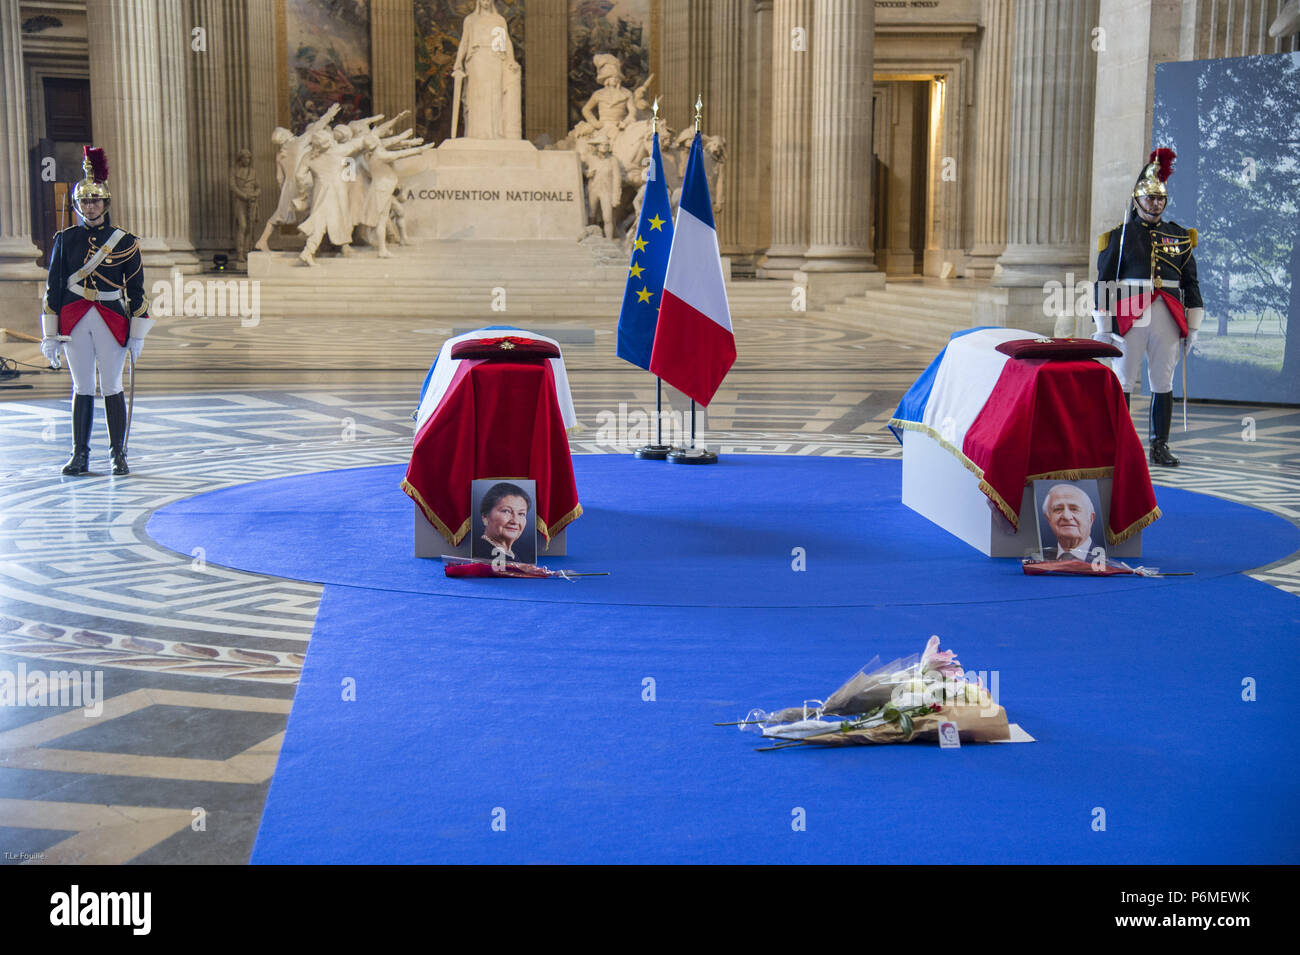 Paris, Ile de France, France. 1st July, 2018. Caskets of the deceased during the ceremony.The burial ceremony of former French politician and Holocaust survivor Simone Veil and her husband Antoine Veil at the Pantheon in Paris. Former Health Minister, Simone Veil, who passed away on June 30, 2017 became president of the European Parliament and one of France's most revered politicians by advocating the 1975 law legalizing abortion in France. Credit: Thierry Le Fouille/SOPA Images/ZUMA Wire/Alamy Live News Stock Photo